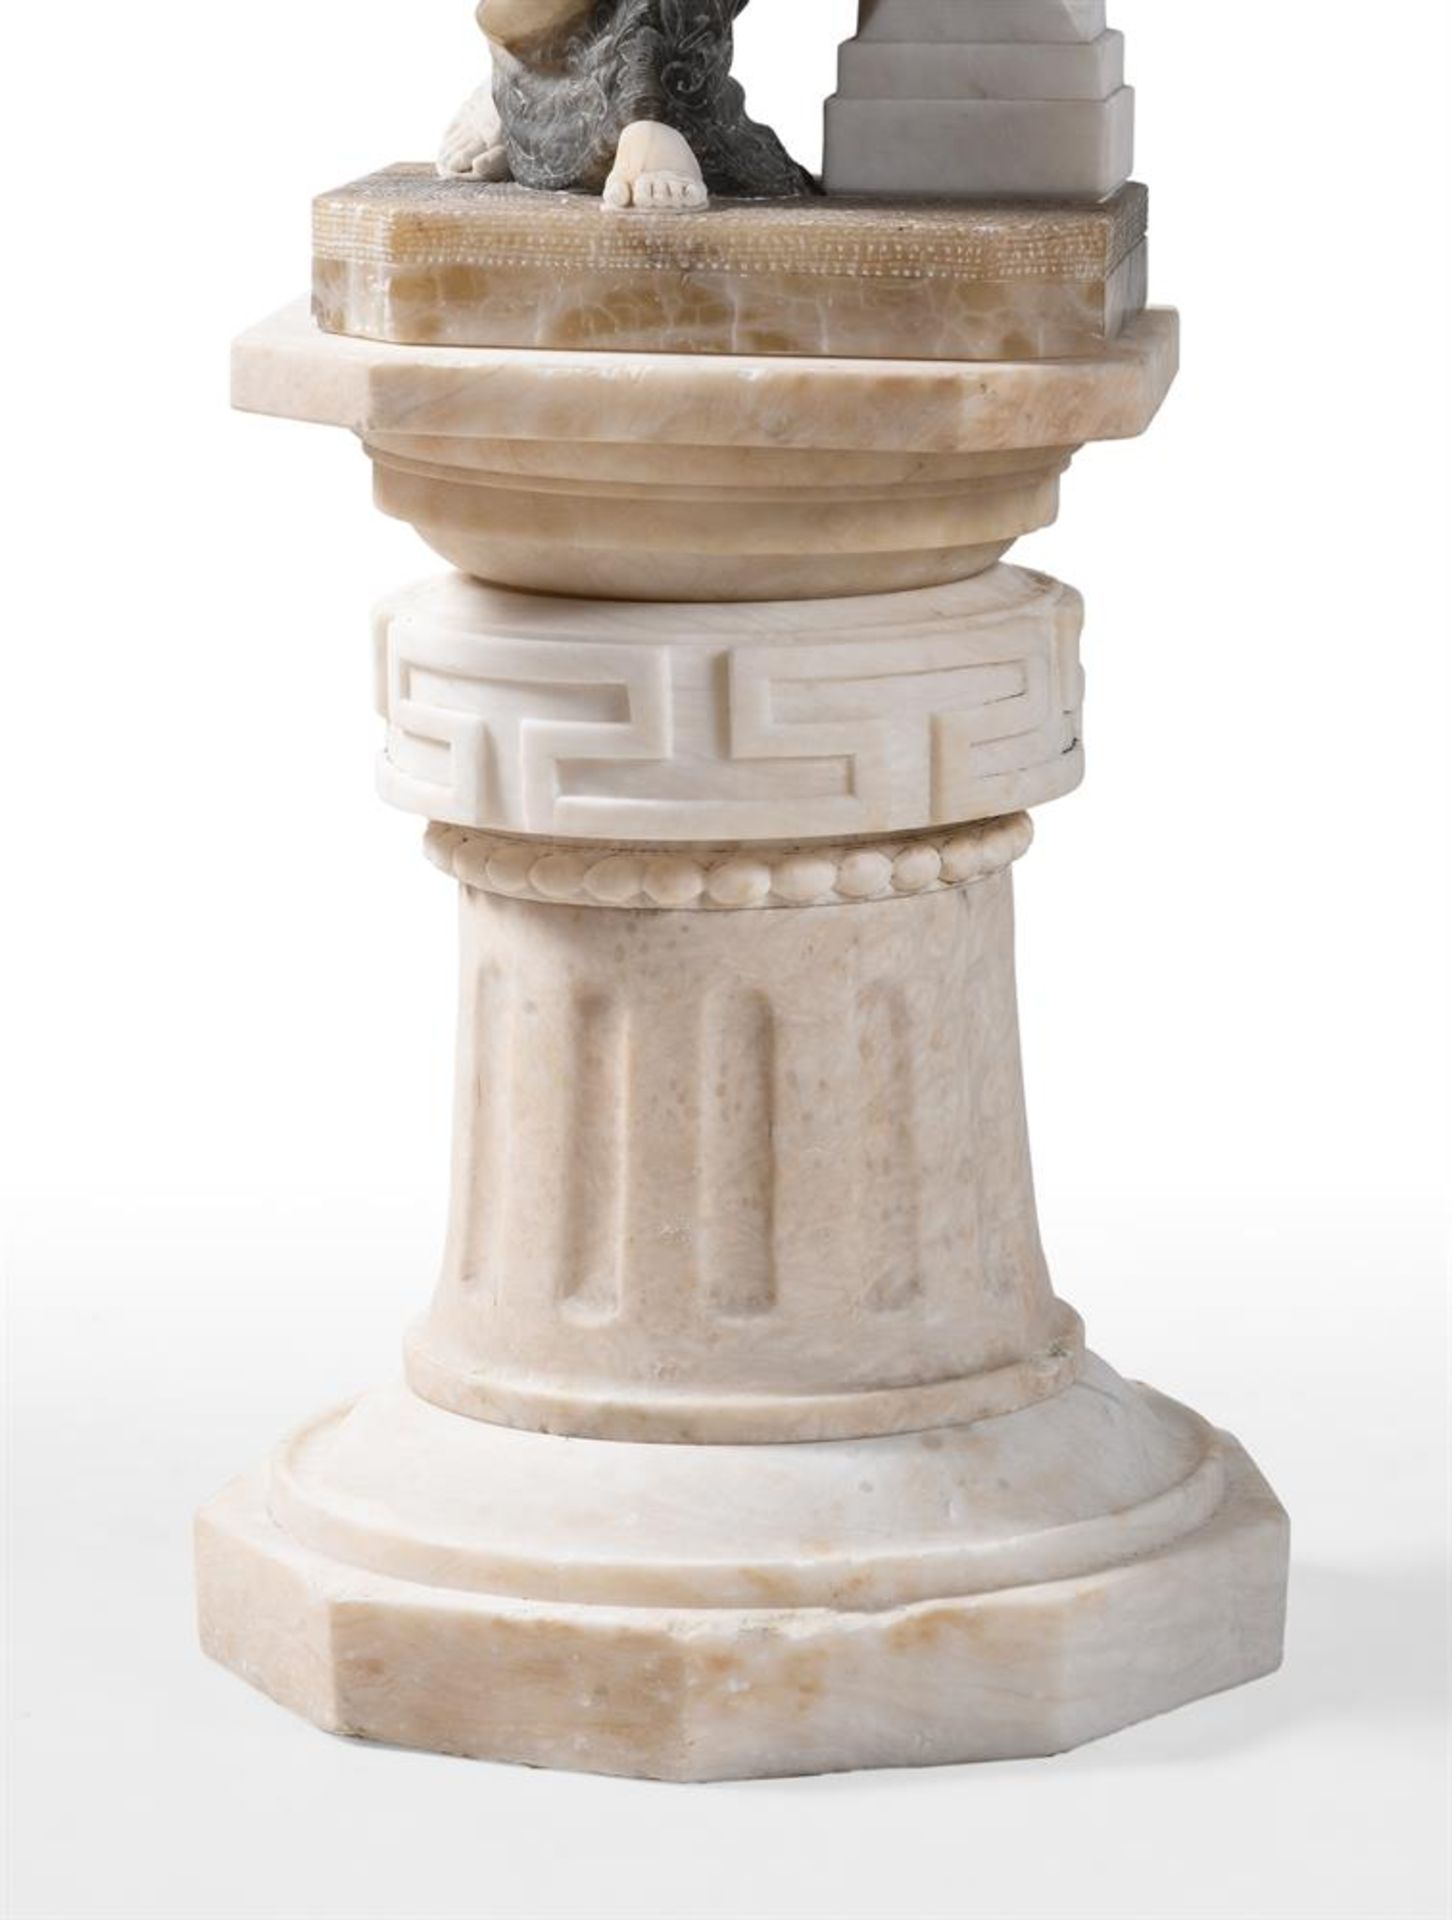 AN ITALIAN ALABASTER MAIDEN LAMP WITH STAND, LATE 19TH OR EARLY 20TH CENTURY - Image 8 of 8